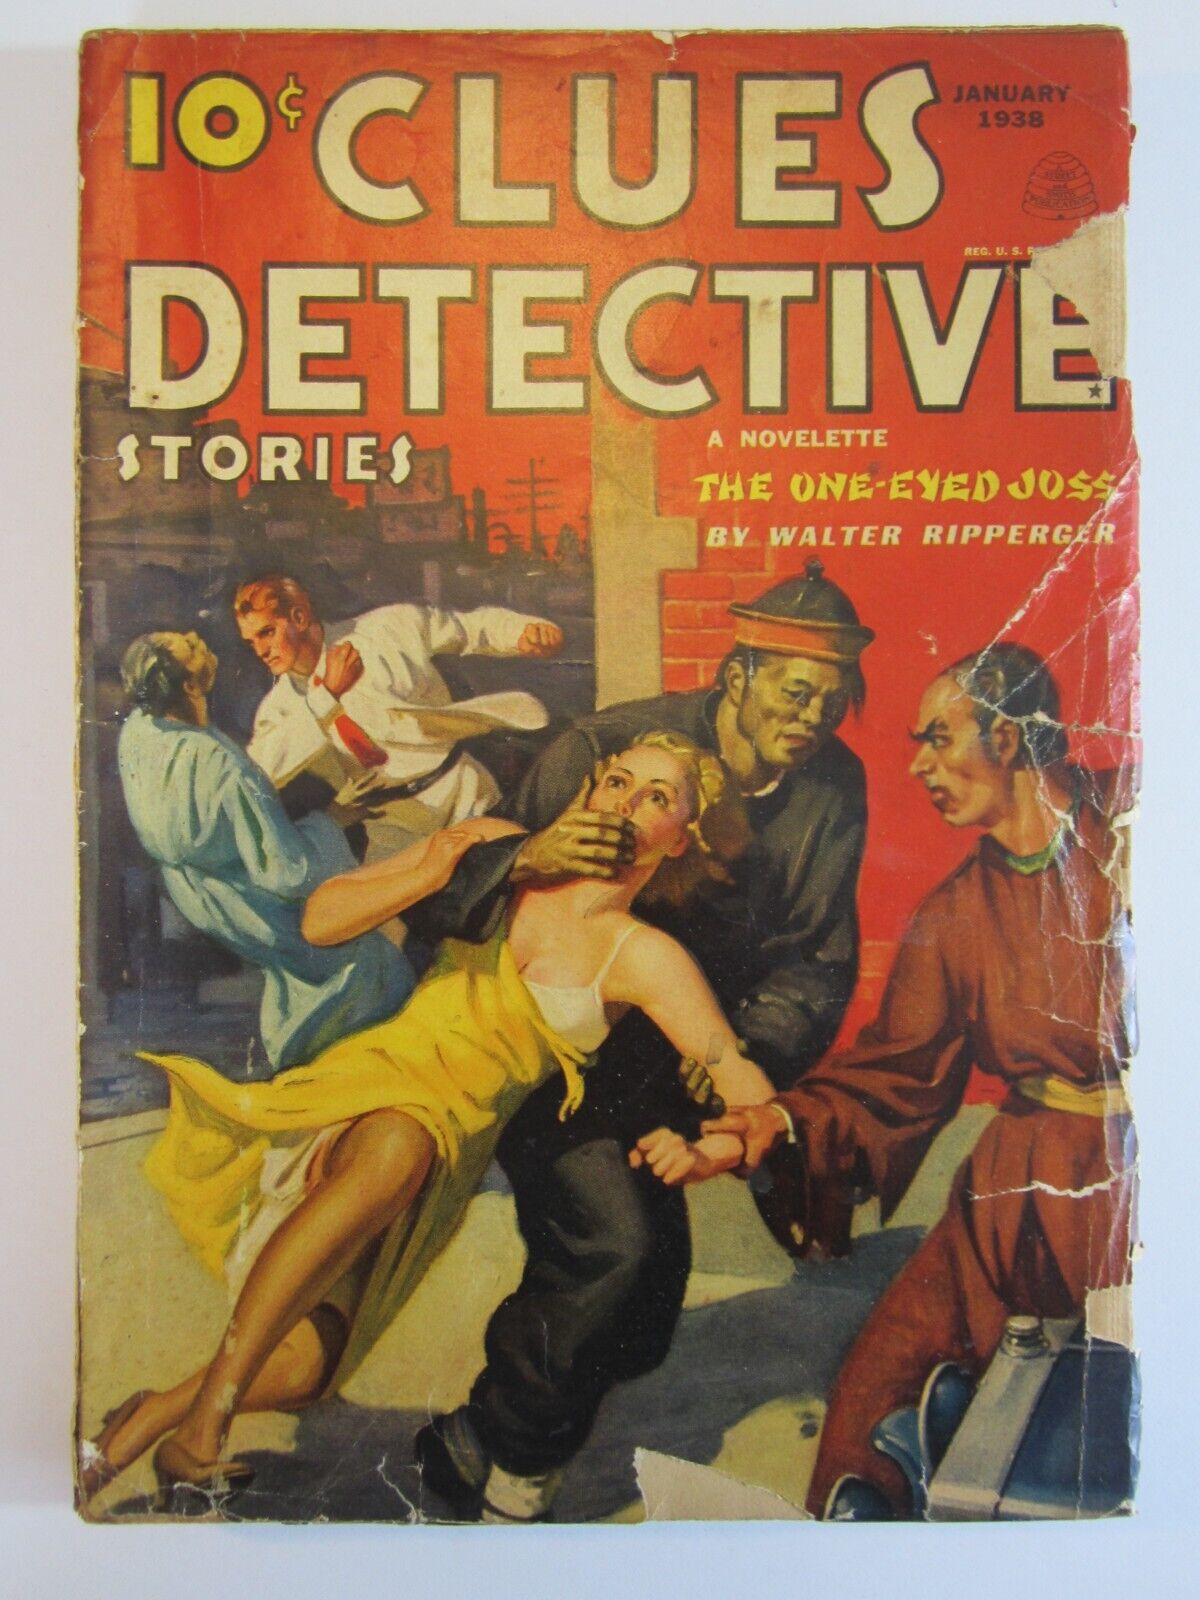 Clues Detective Stories Pulp v.39 #2, January 1938 GD